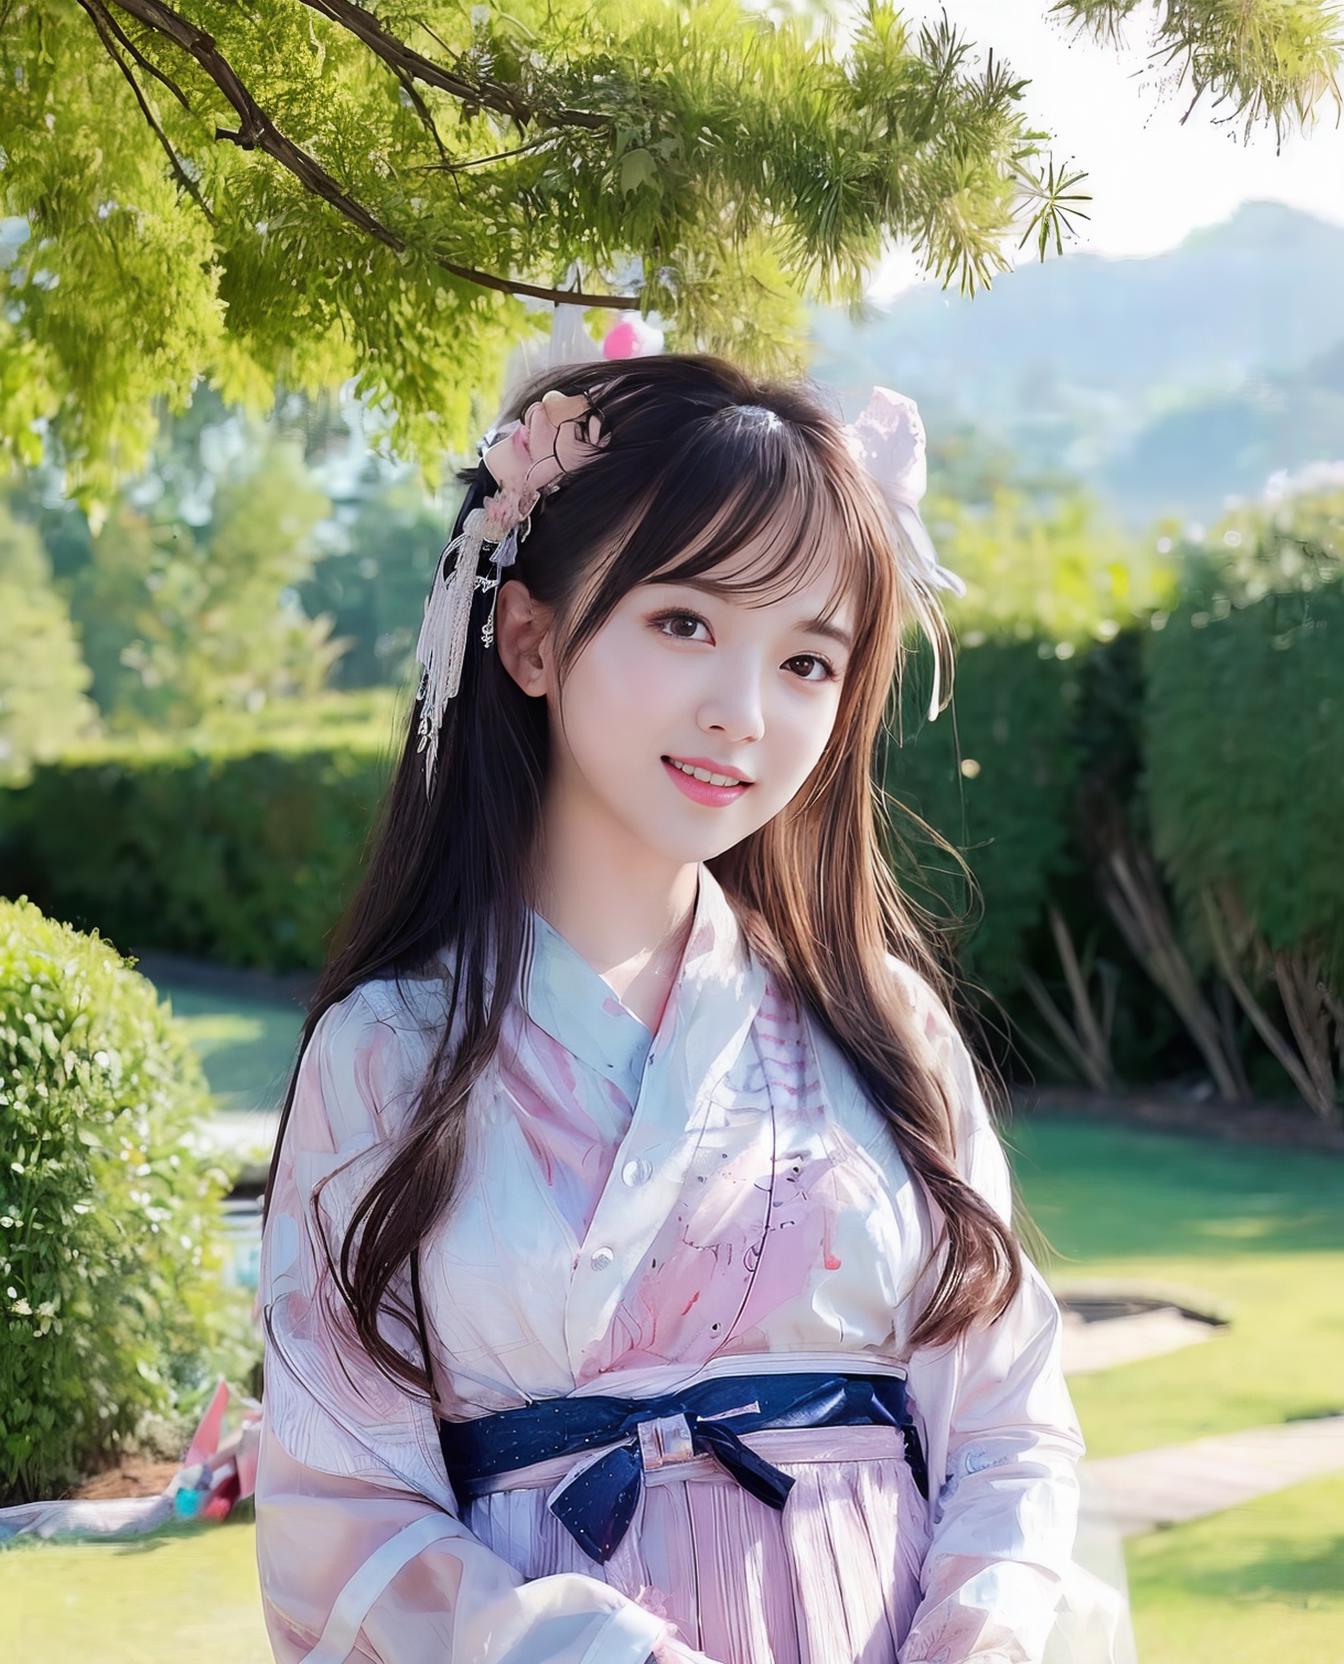 A woman wearing a traditional kimono poses for a picture outdoors.